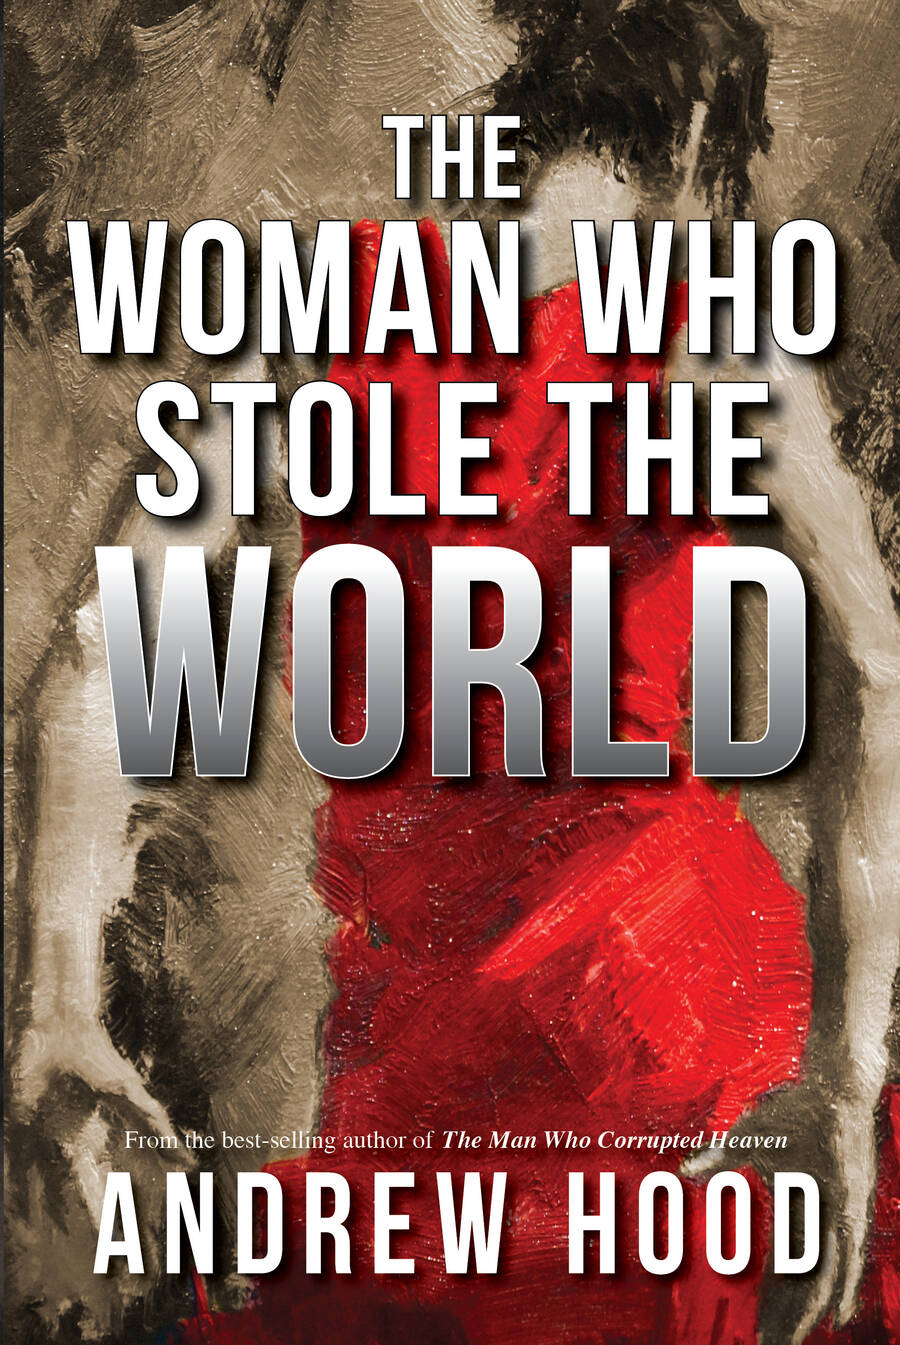 The Woman Who Stole The World